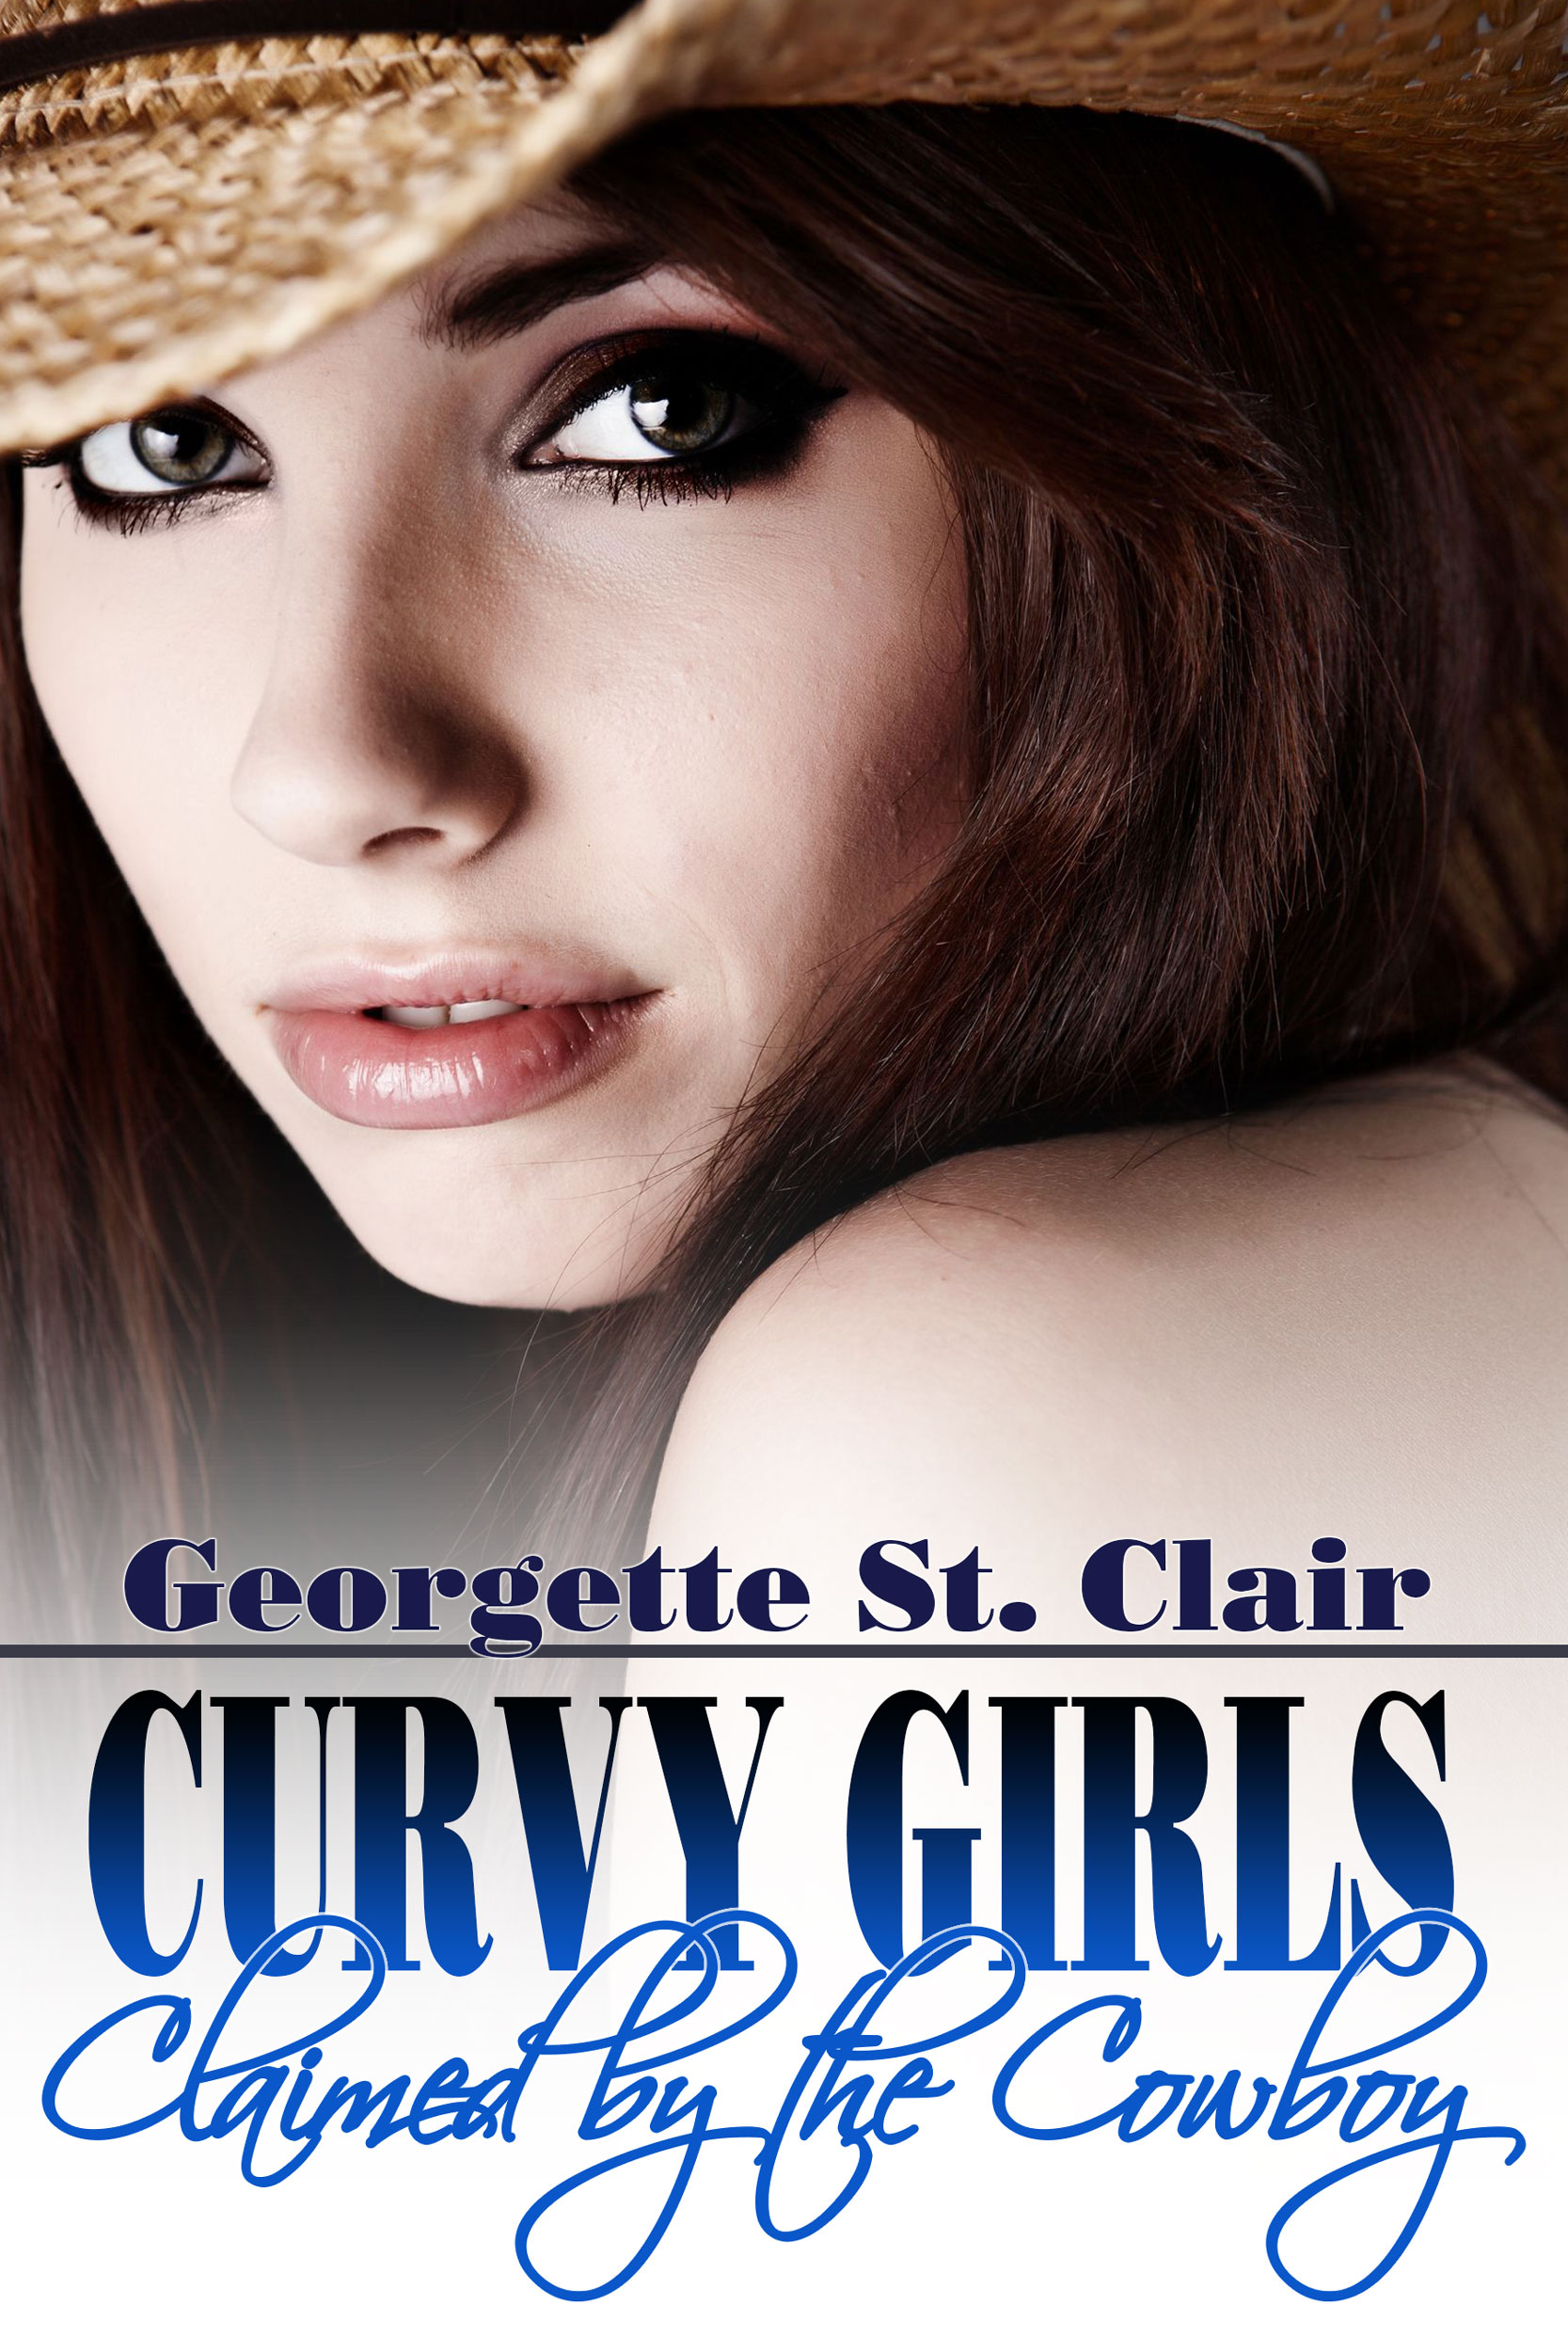 Here's the cover for Curvy Girls: Claimed By The Cowboy